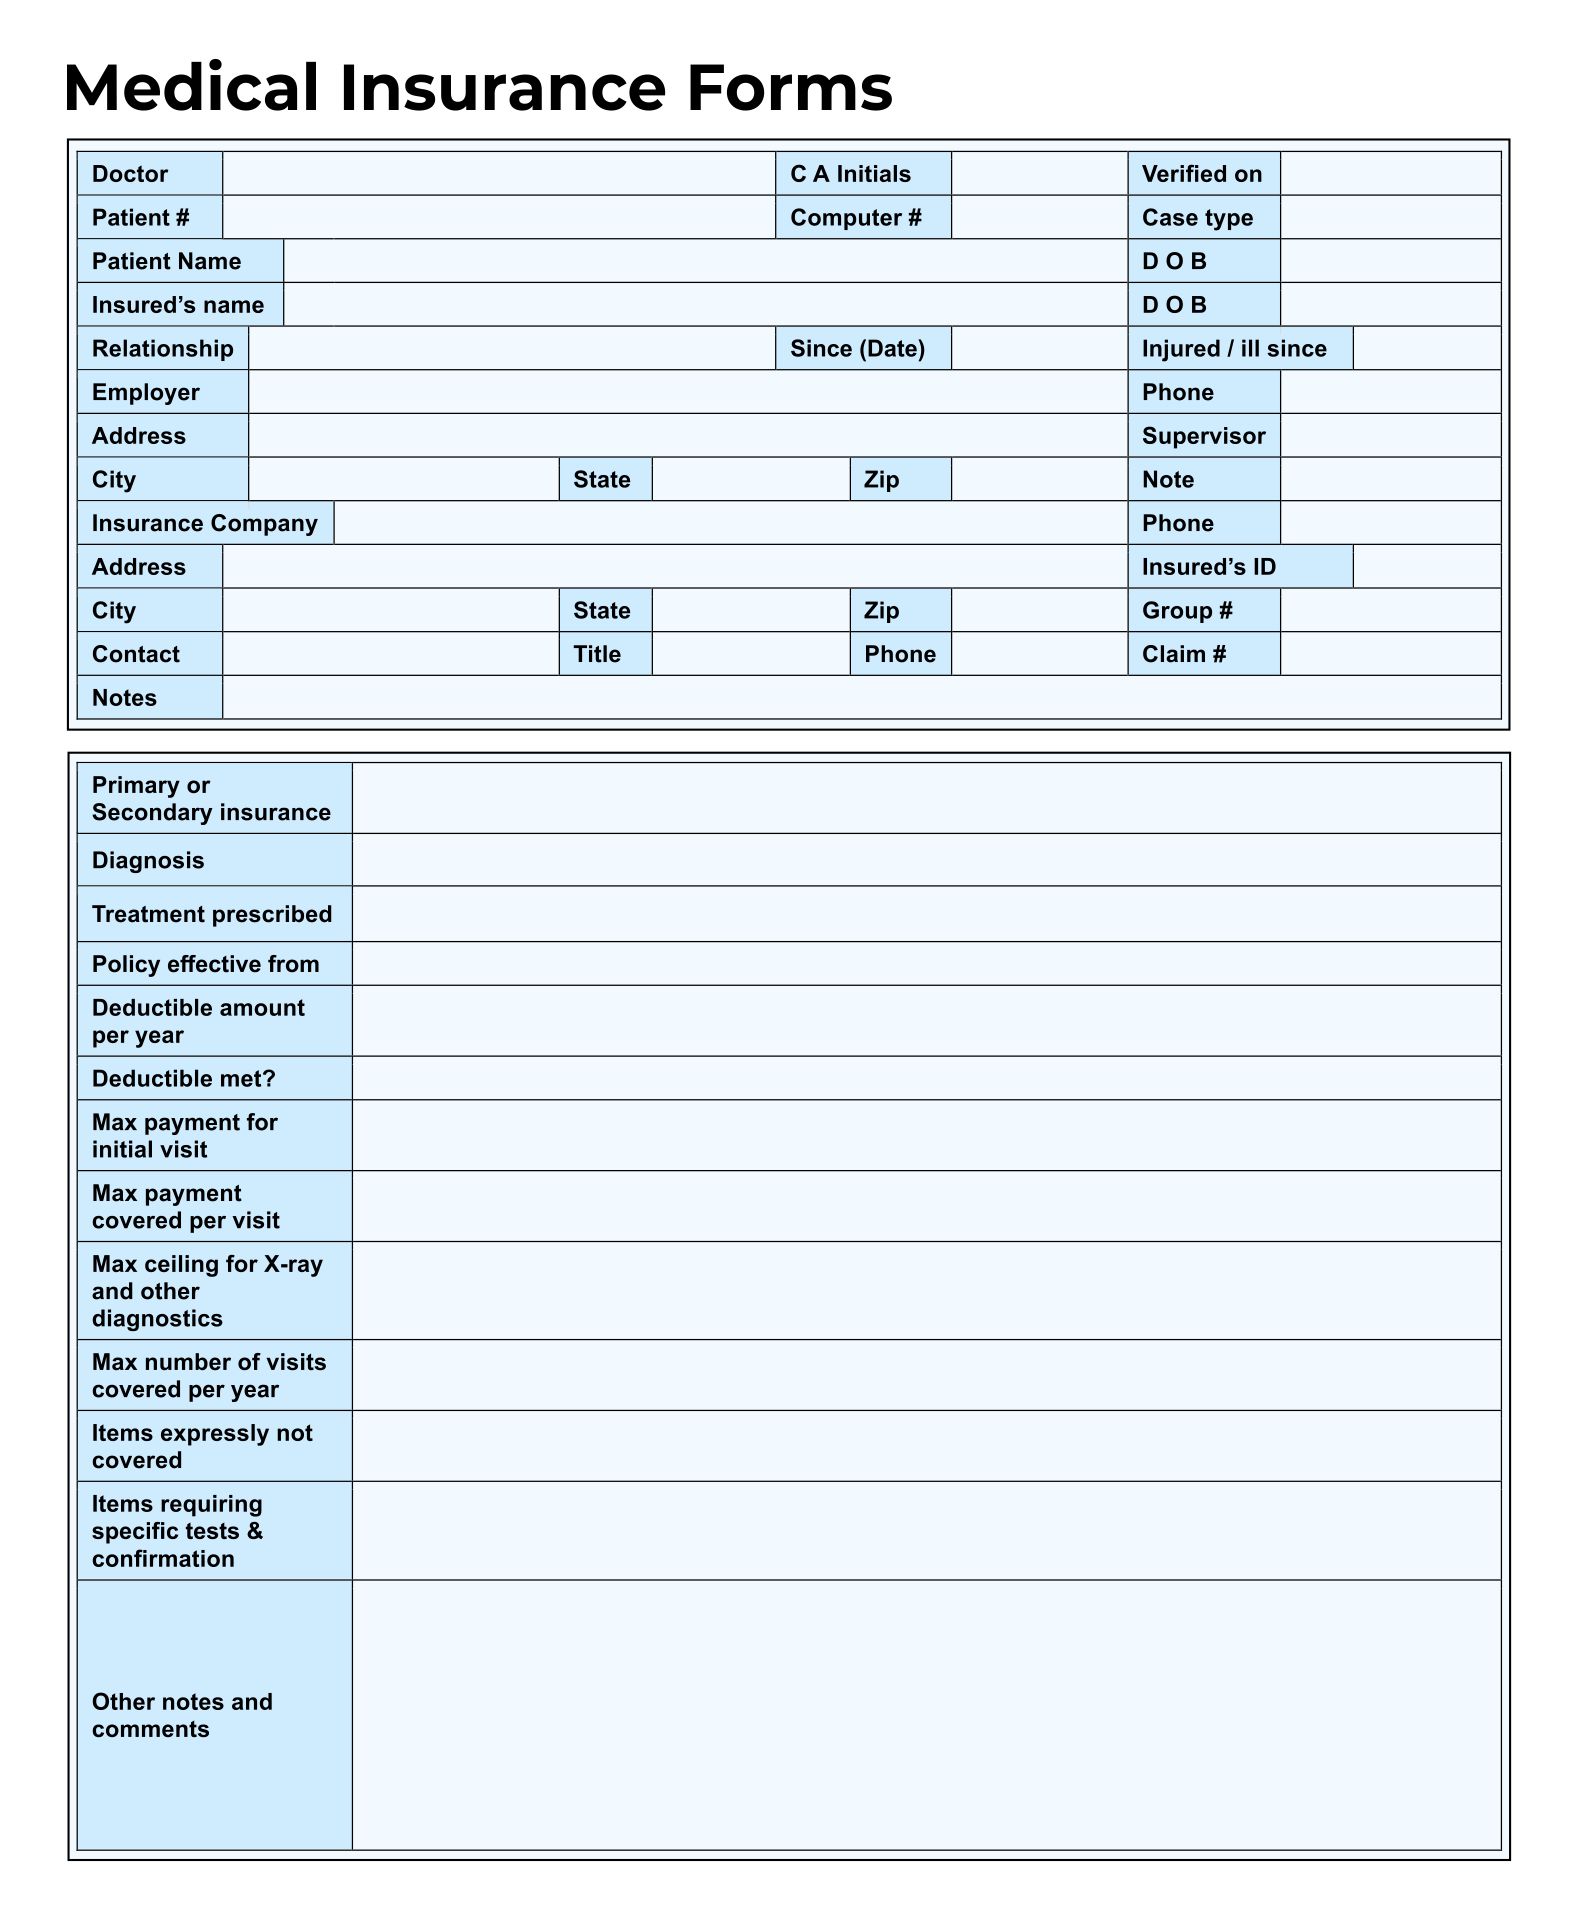 Medical Insurance Forms Templates